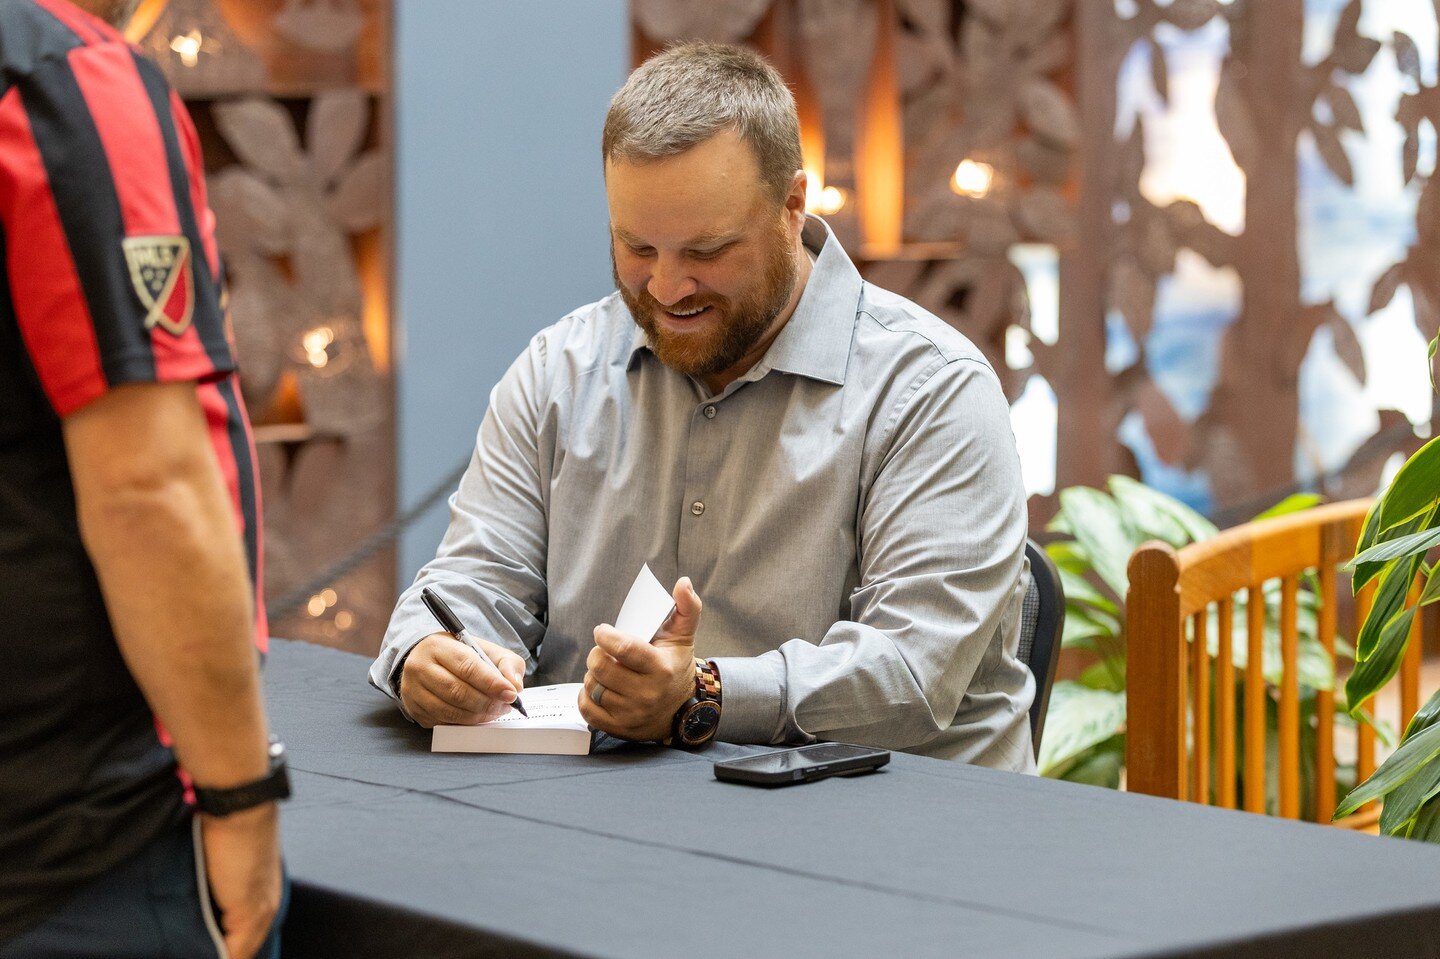 Book signing event coverage for our very own @danielquigleyauthor !

Like our content? We would love to create content for you to help capture some of life&rsquo;s best moments for you! Follow @spreadllcmedia and @spreadllc for more of our work sampl